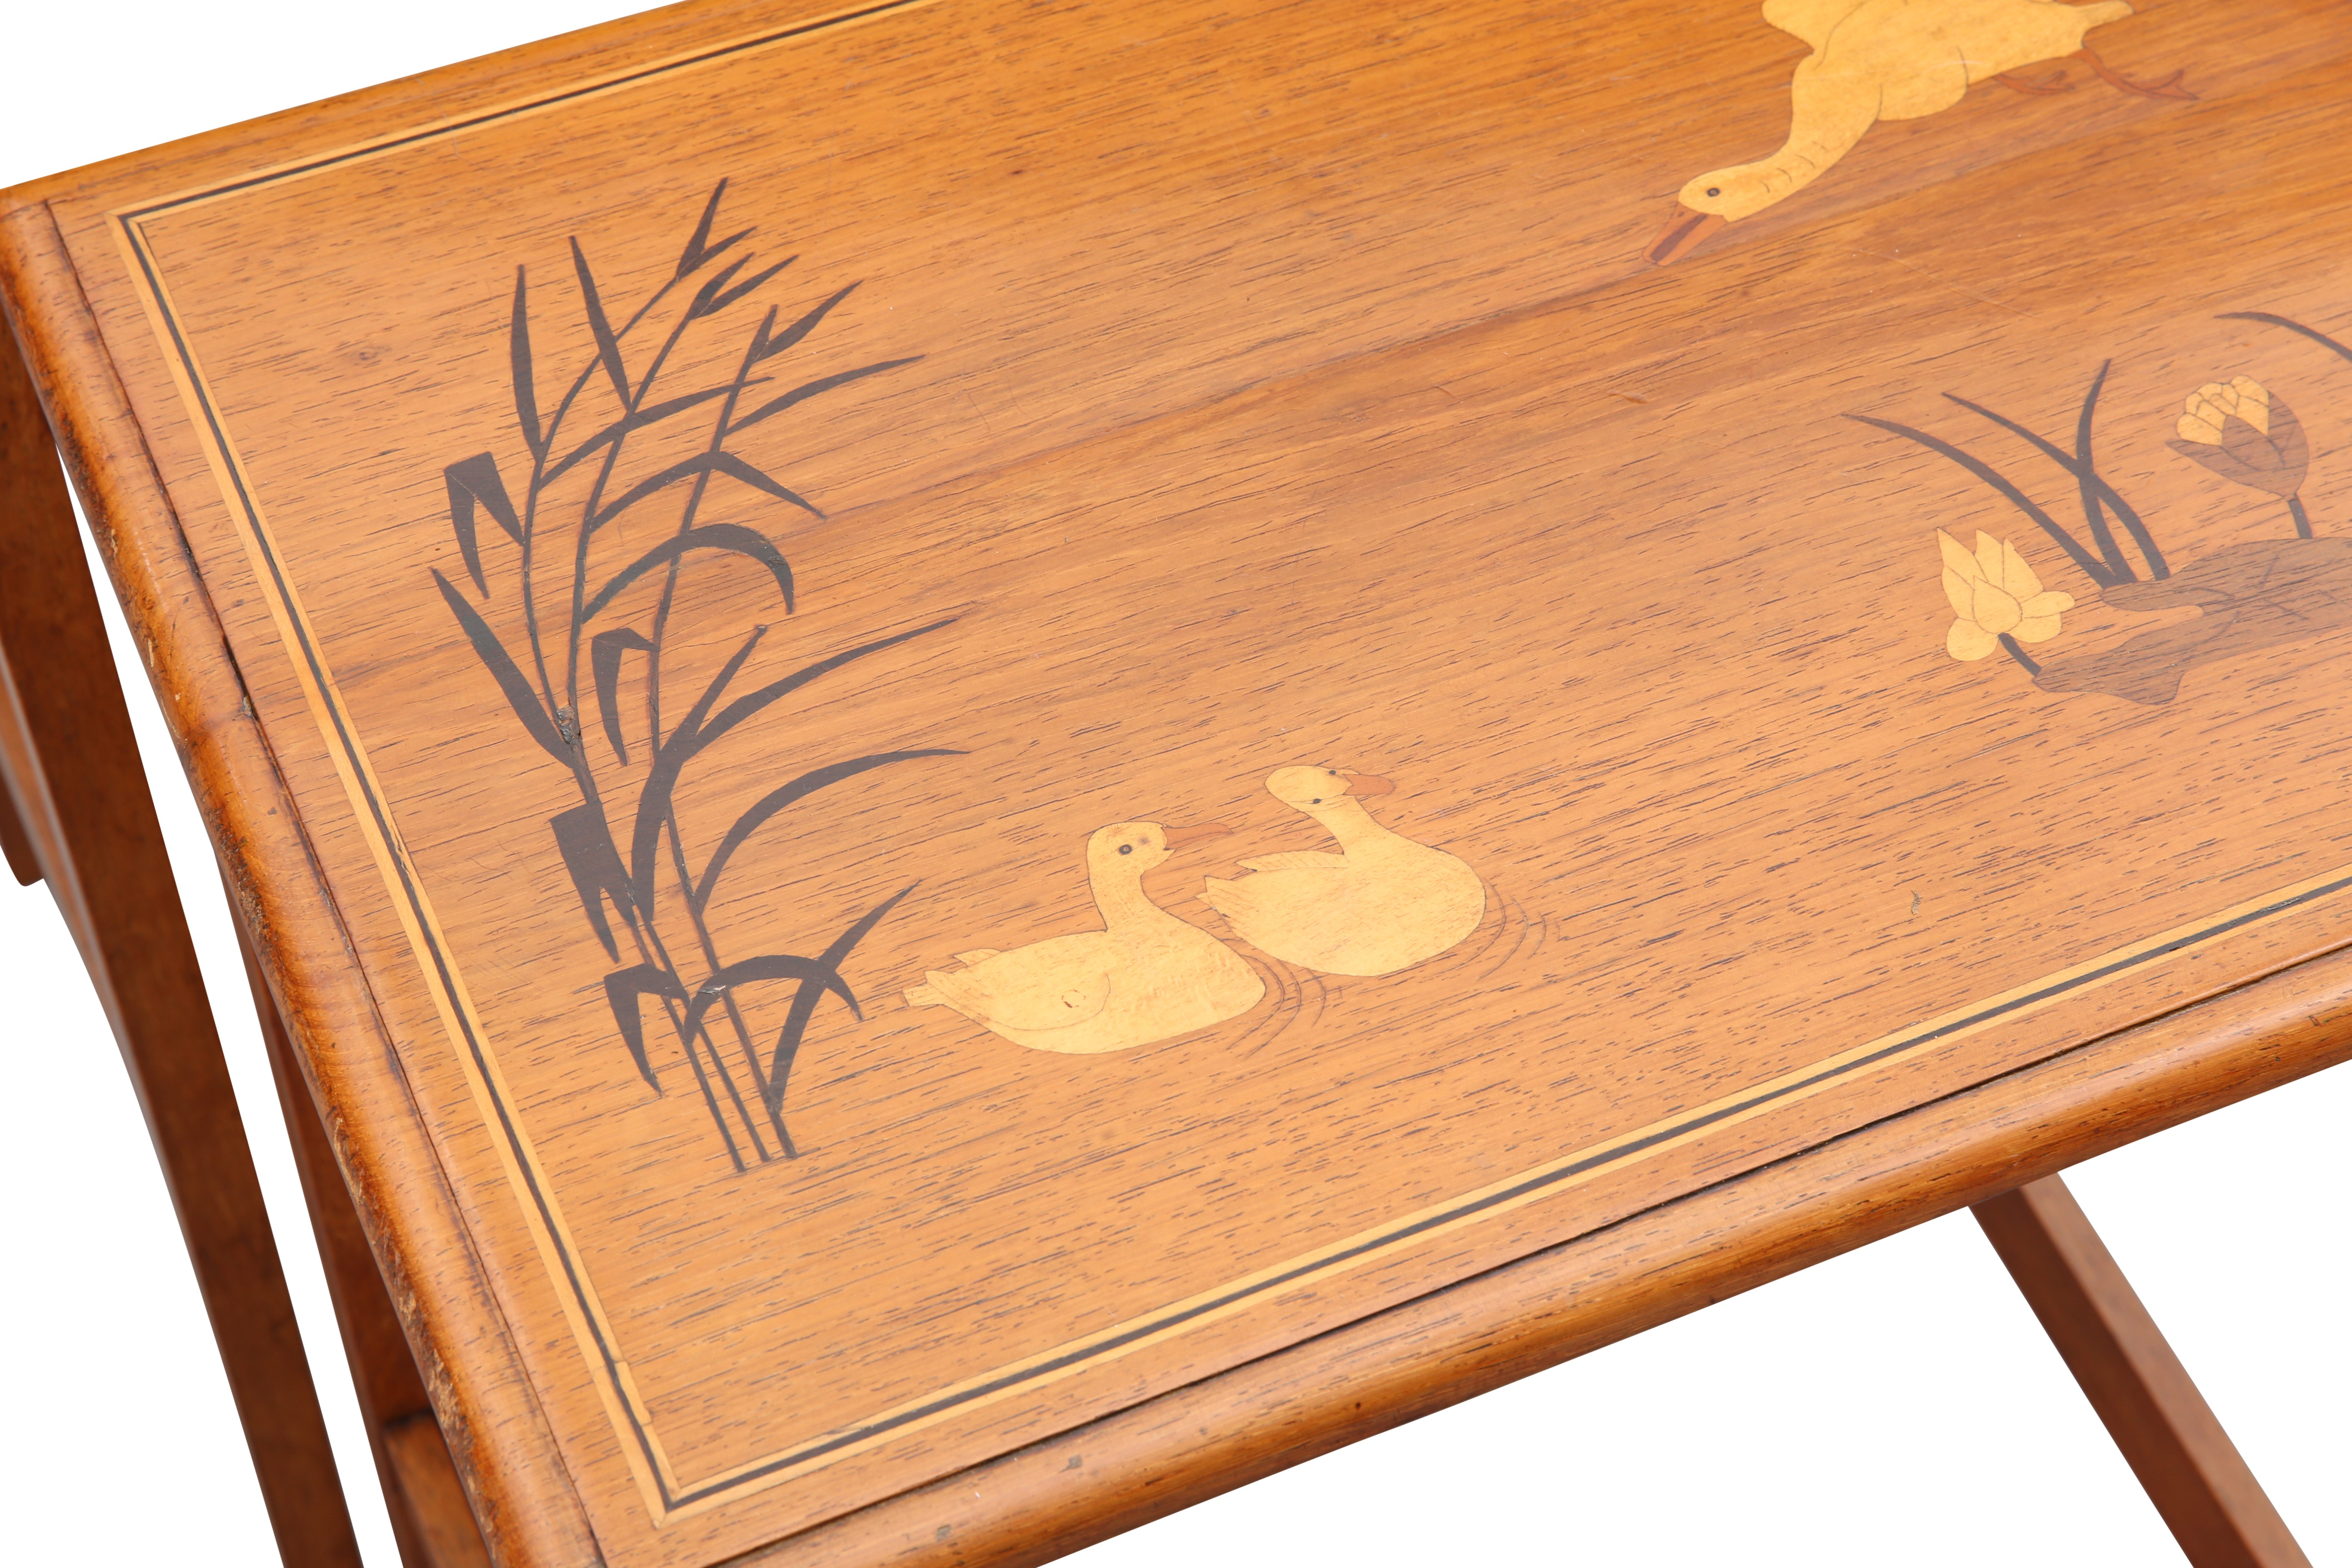 A NEST OF THREE ART NOUVEAU INLAID TABLES - Image 2 of 2